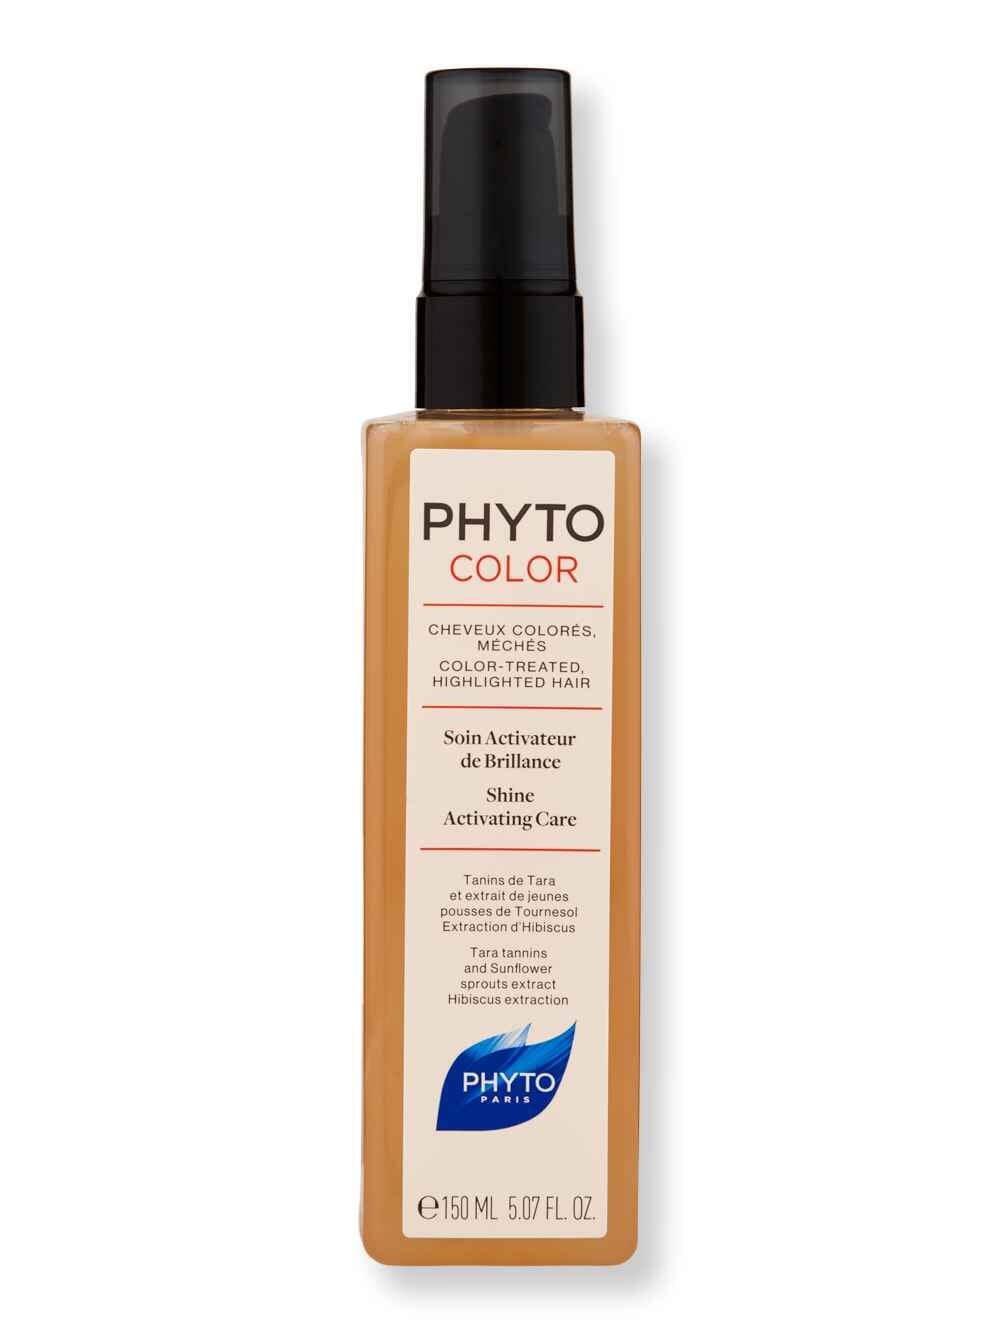 Phyto Phyto PhytoColor Shine Activating Care Gel 5.07 oz150 ml Hair Gels 